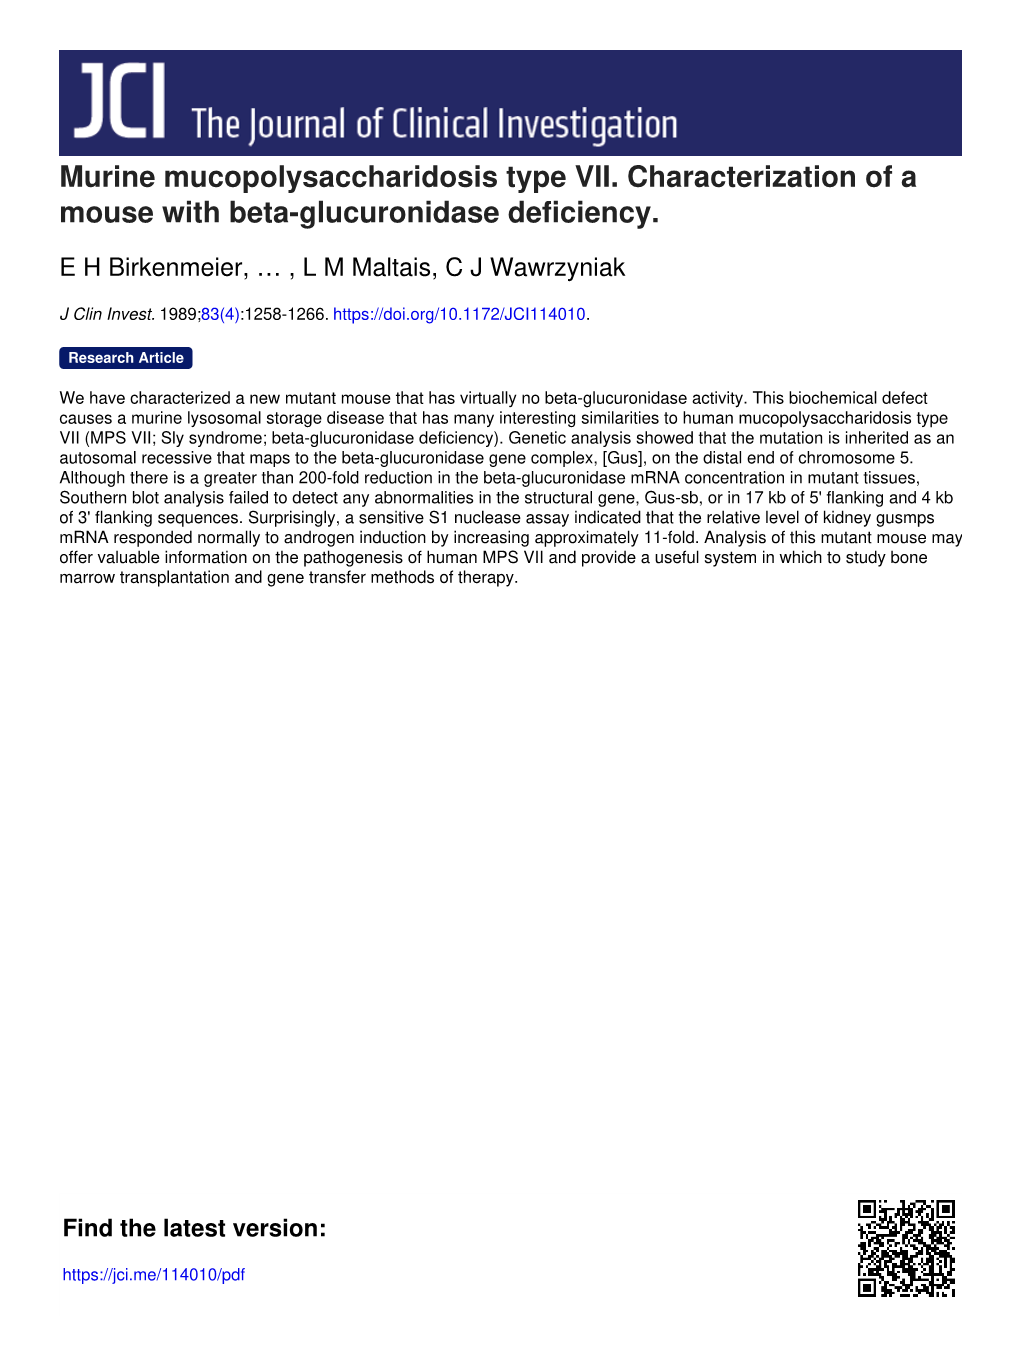 Murine Mucopolysaccharidosis Type VII. Characterization of a Mouse with Beta-Glucuronidase Deficiency